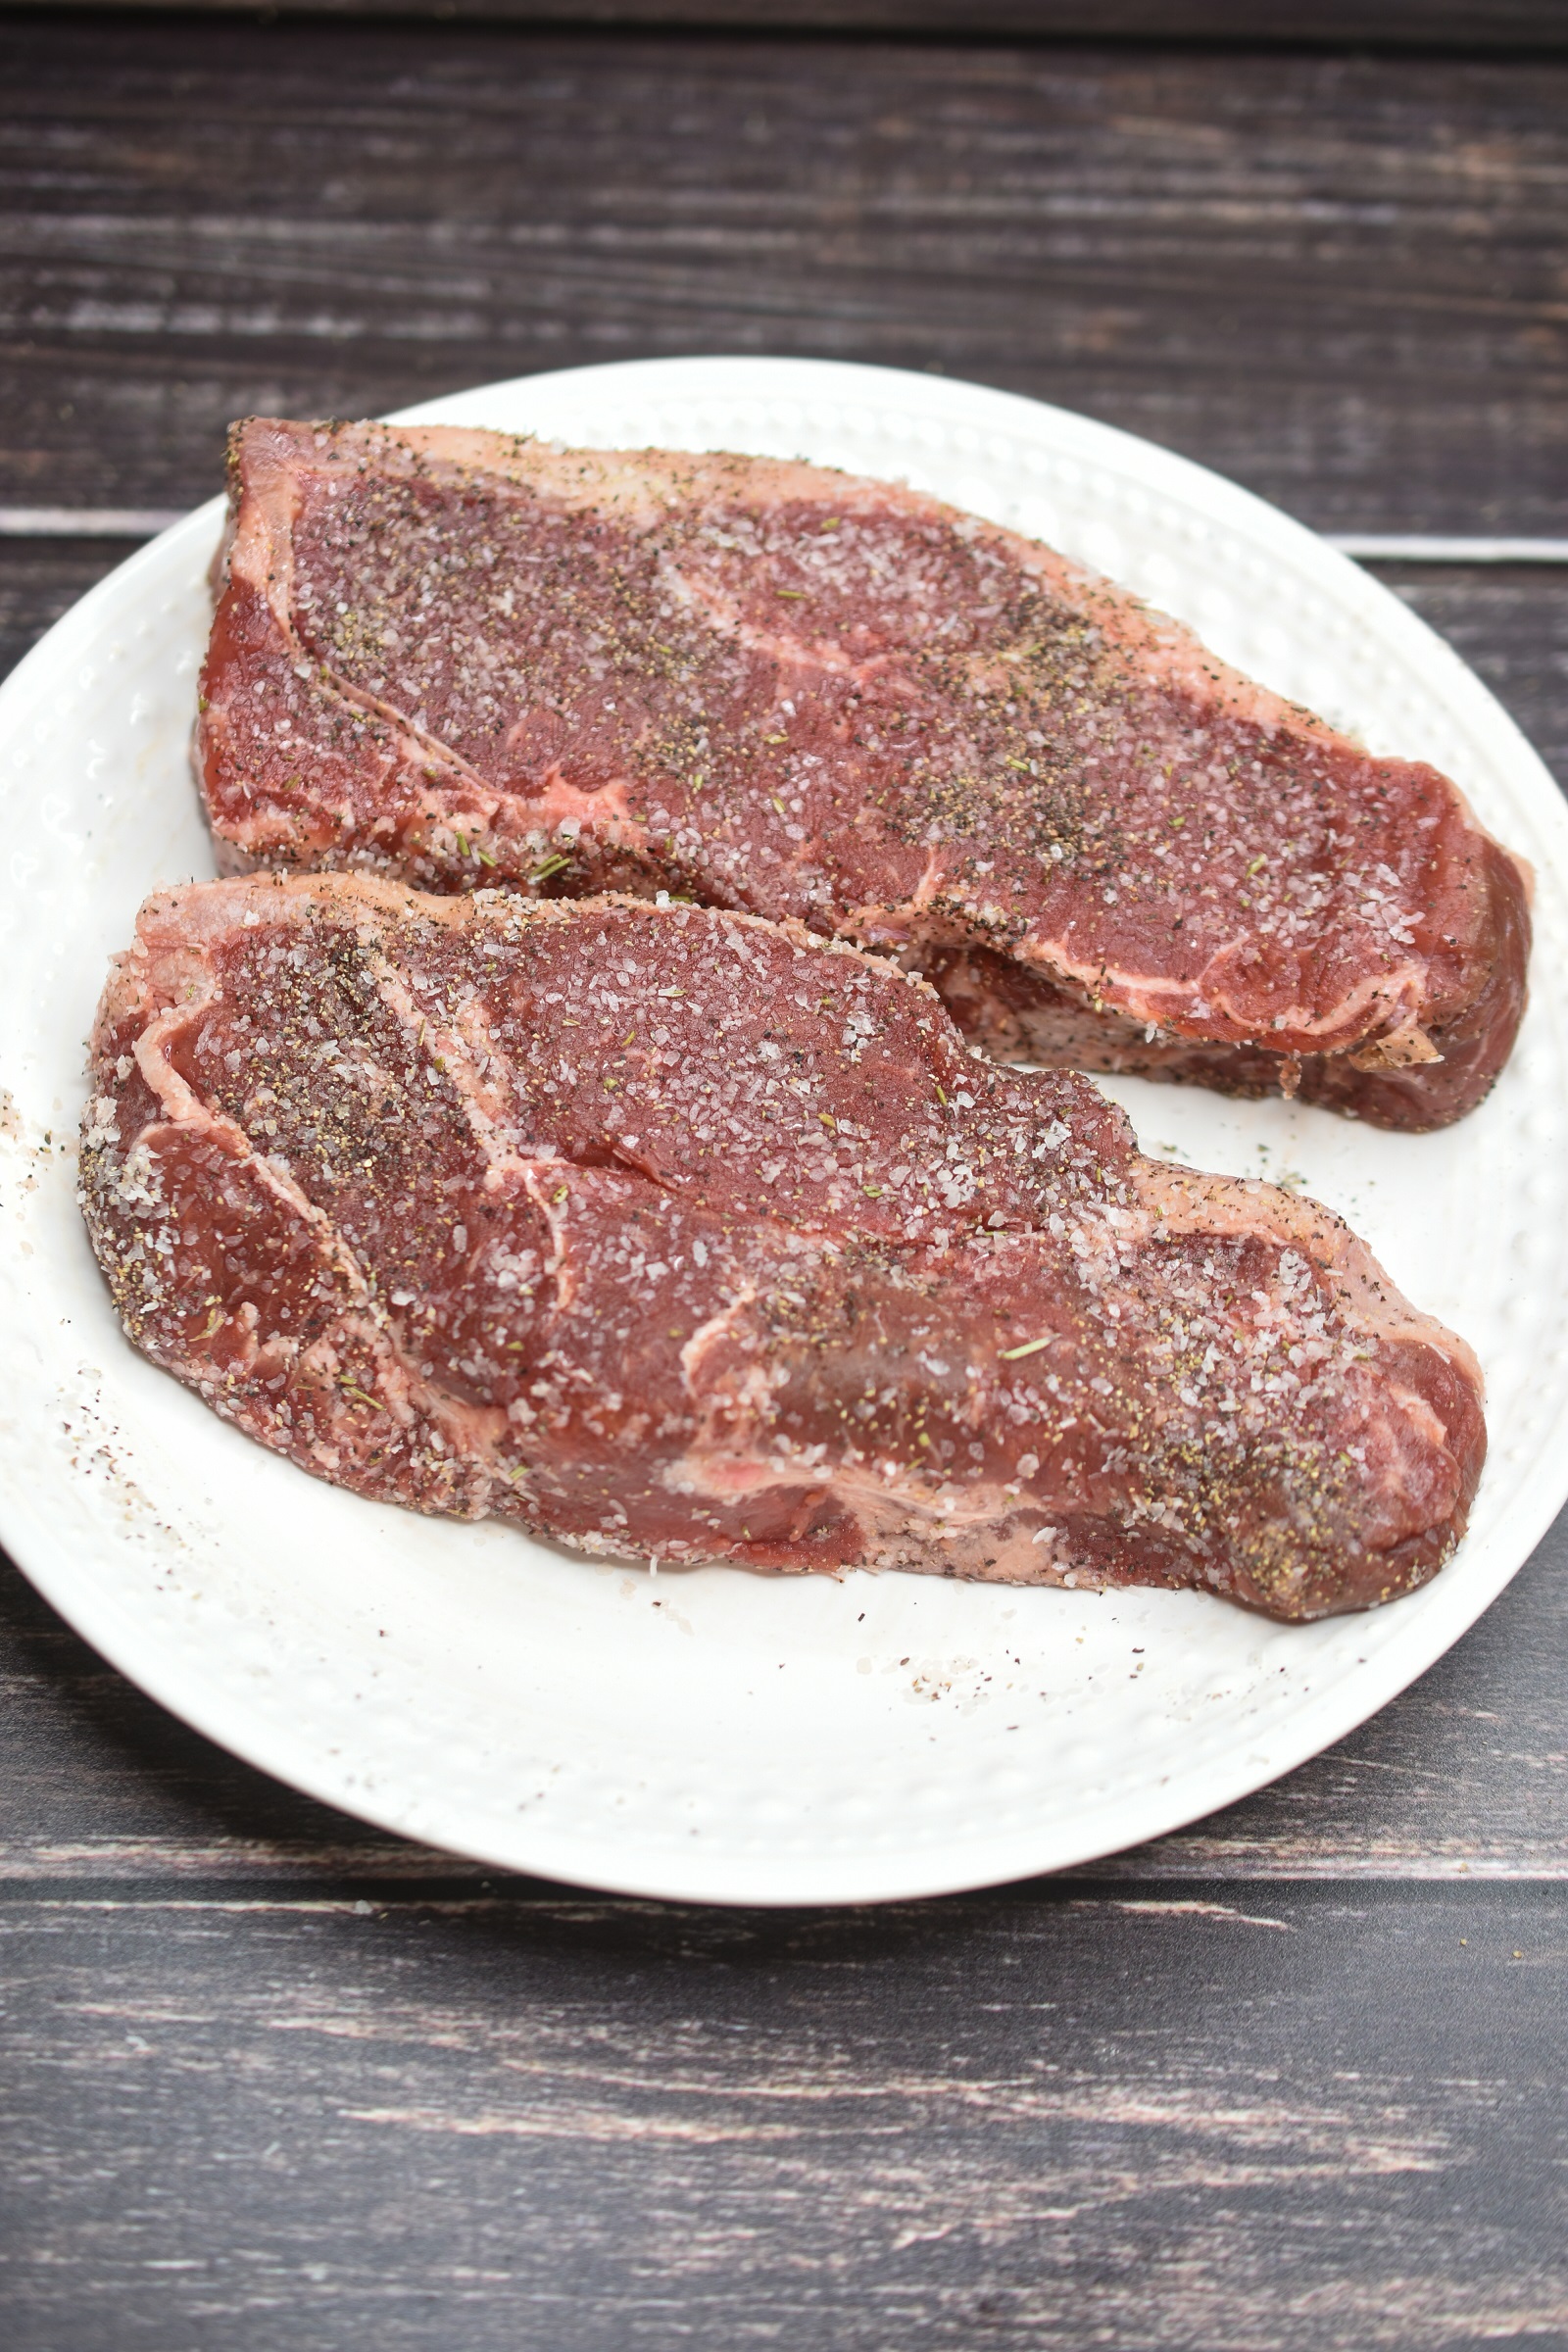 How to cook Bison Steaks ingredients Bison ribeye steaks, kosher salt and black pepper. Butter for the pan and optional herbs.